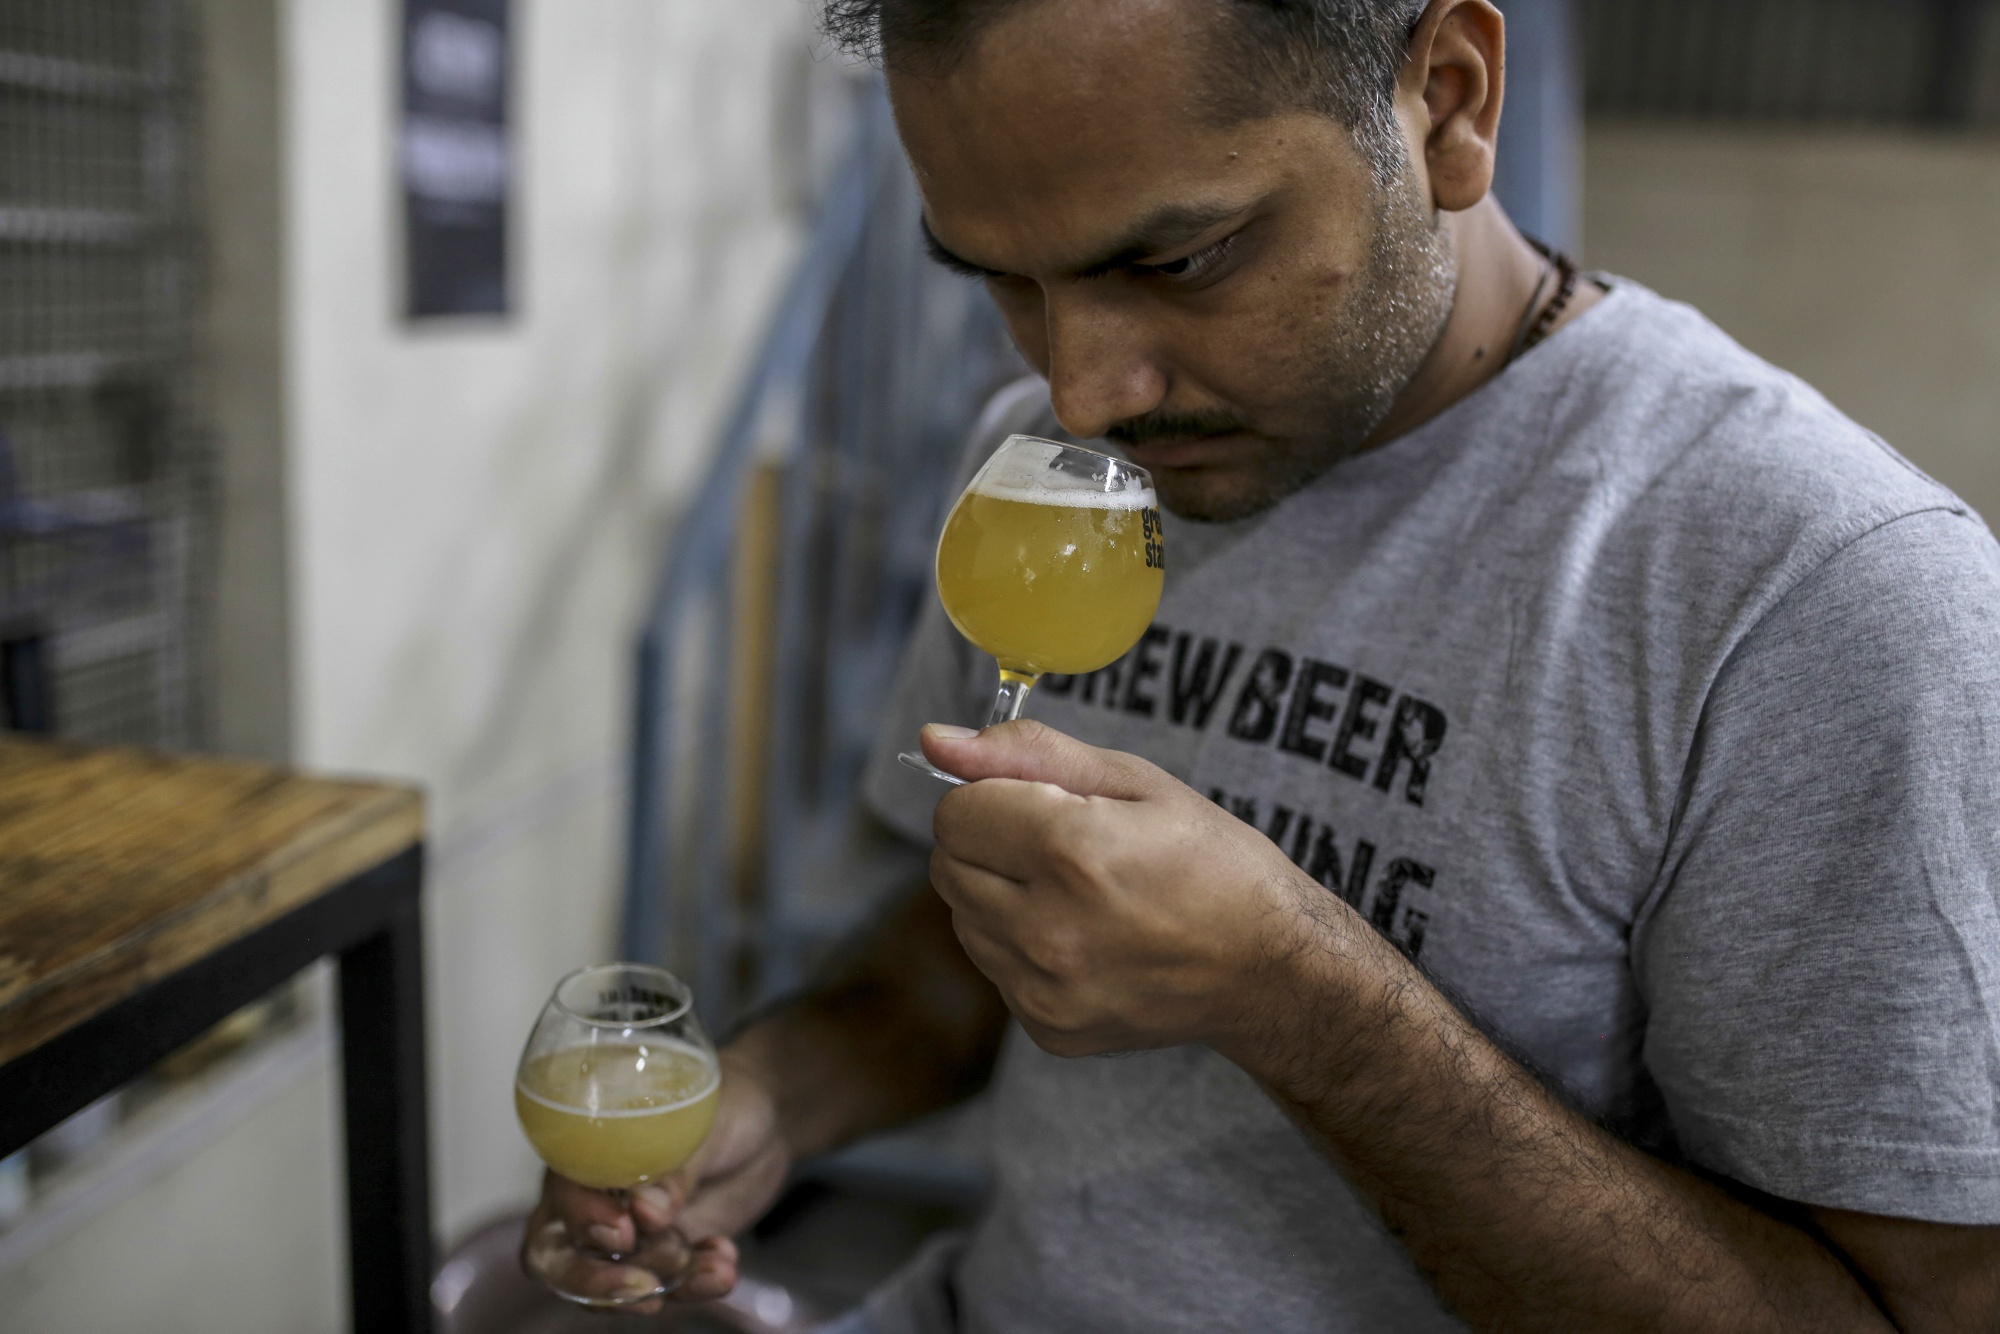 Testing at the Great State Ale Works microbrewery in Pune, on Nov. 27.